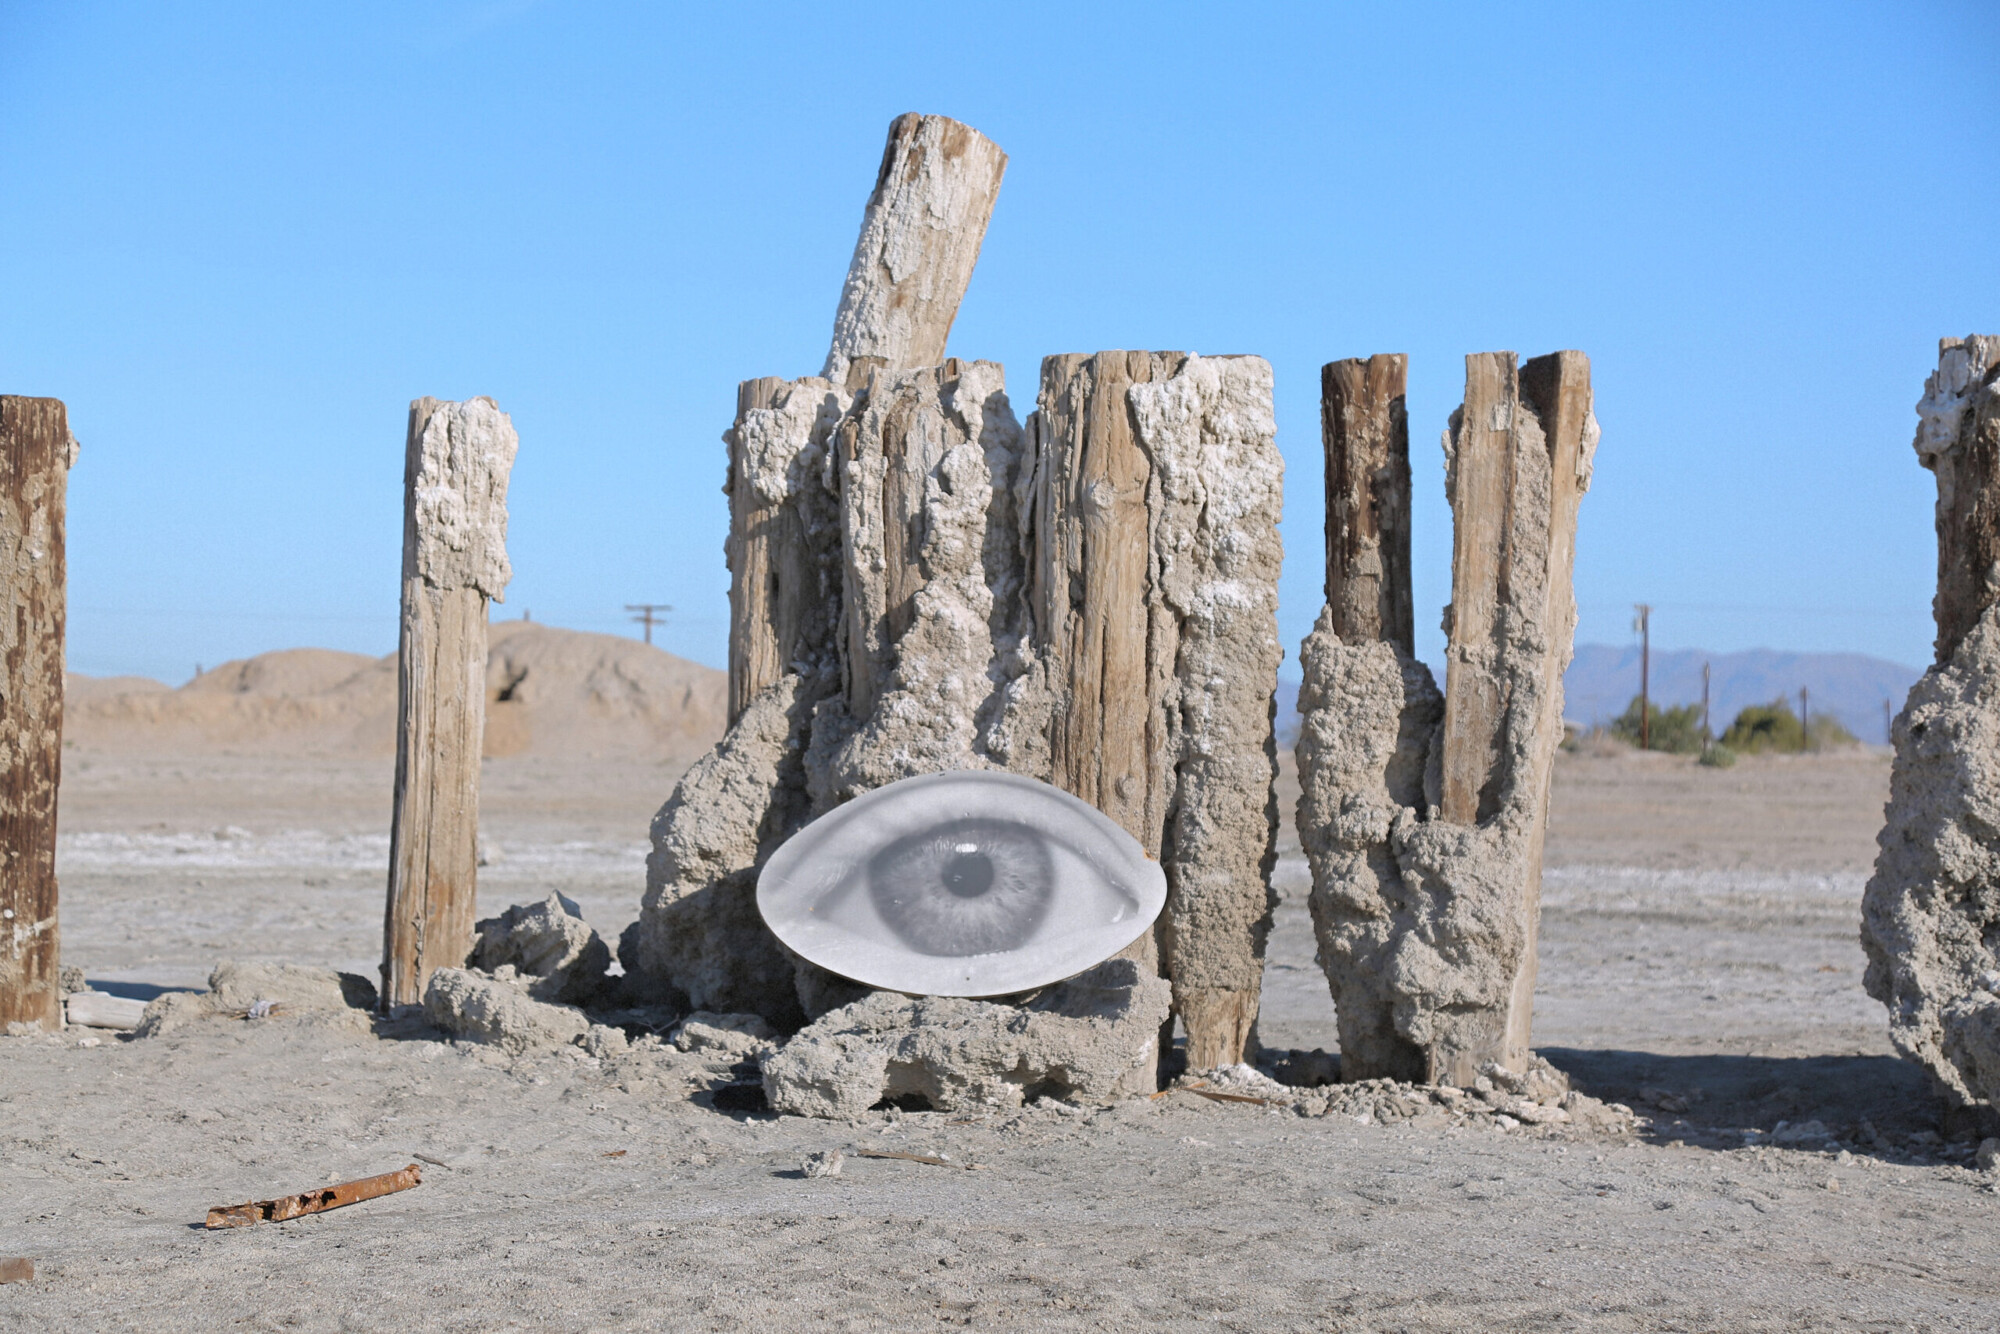 Outsider art of an image of an eye against a crumbling fence in Bombay Beach, California.